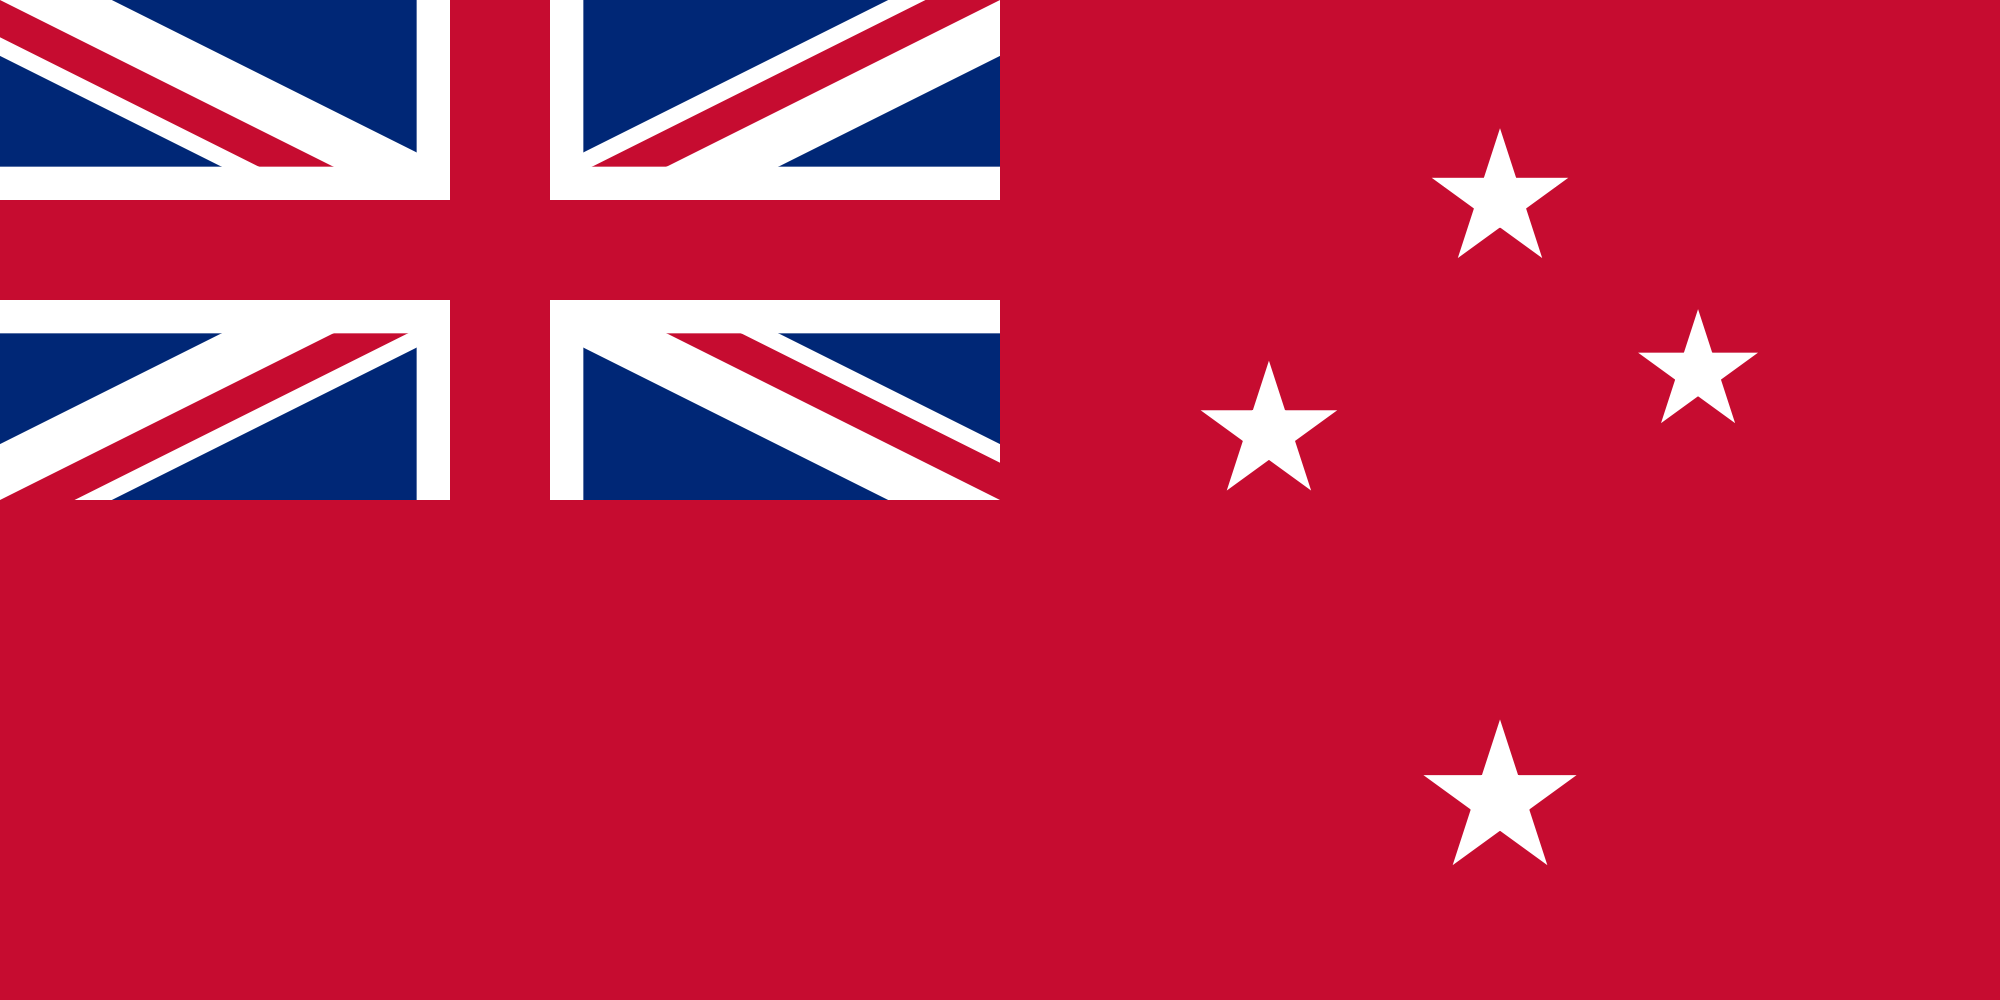 New Zealand (Red Ensign)